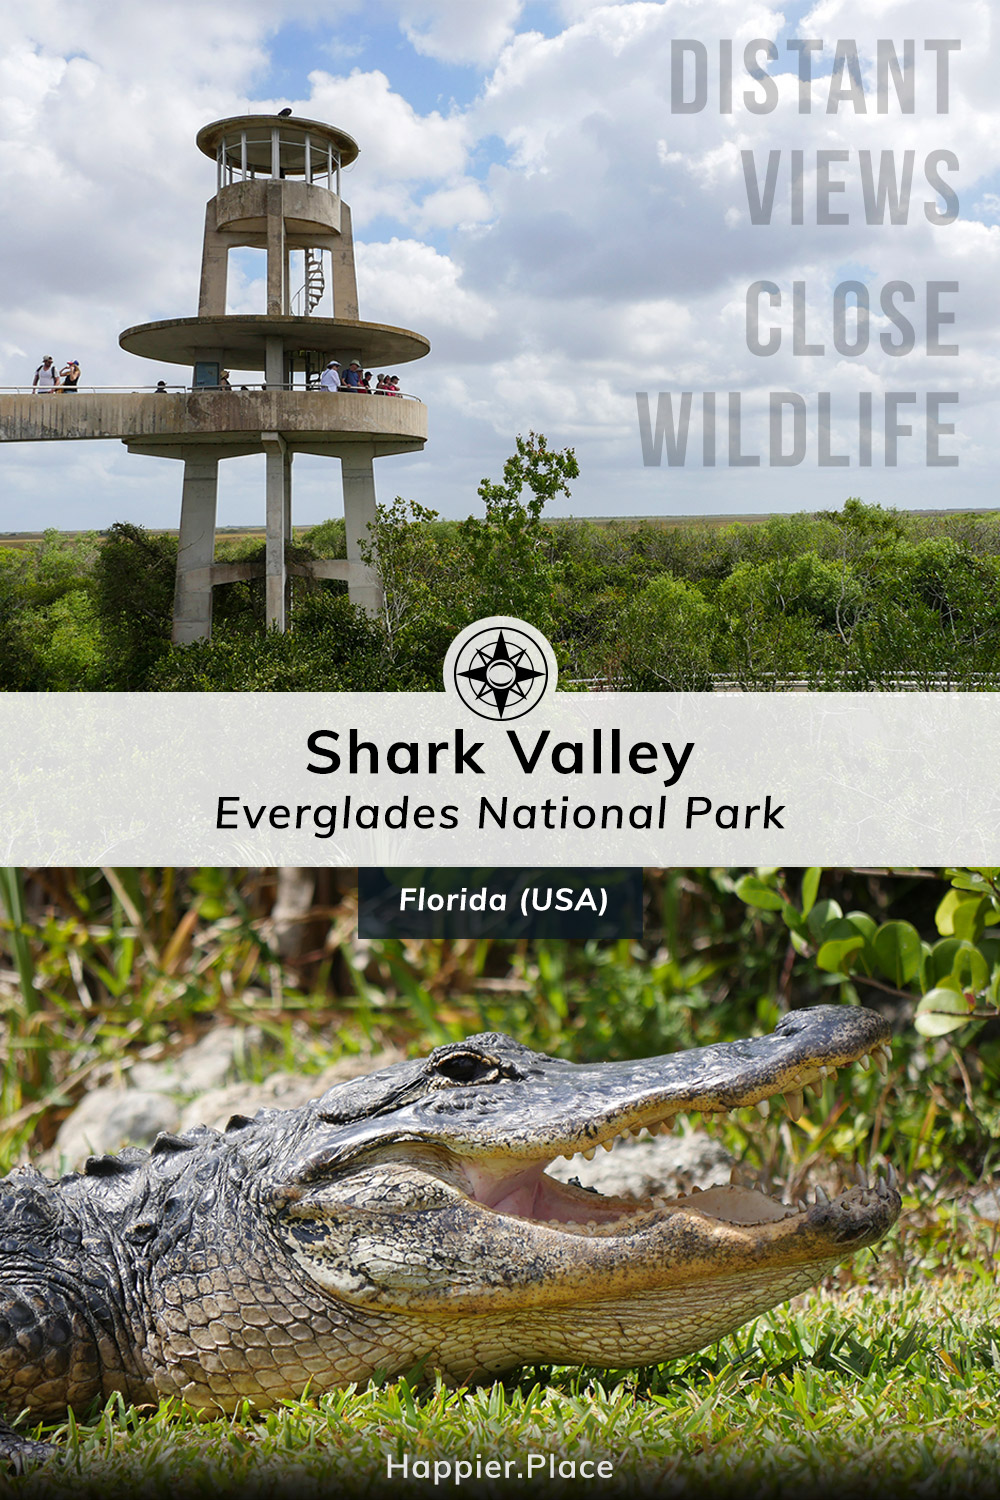 Distant views and close wildlife in Shark Valley Everglades National Park, Florida, USA, gator, observation tower, Happier Place